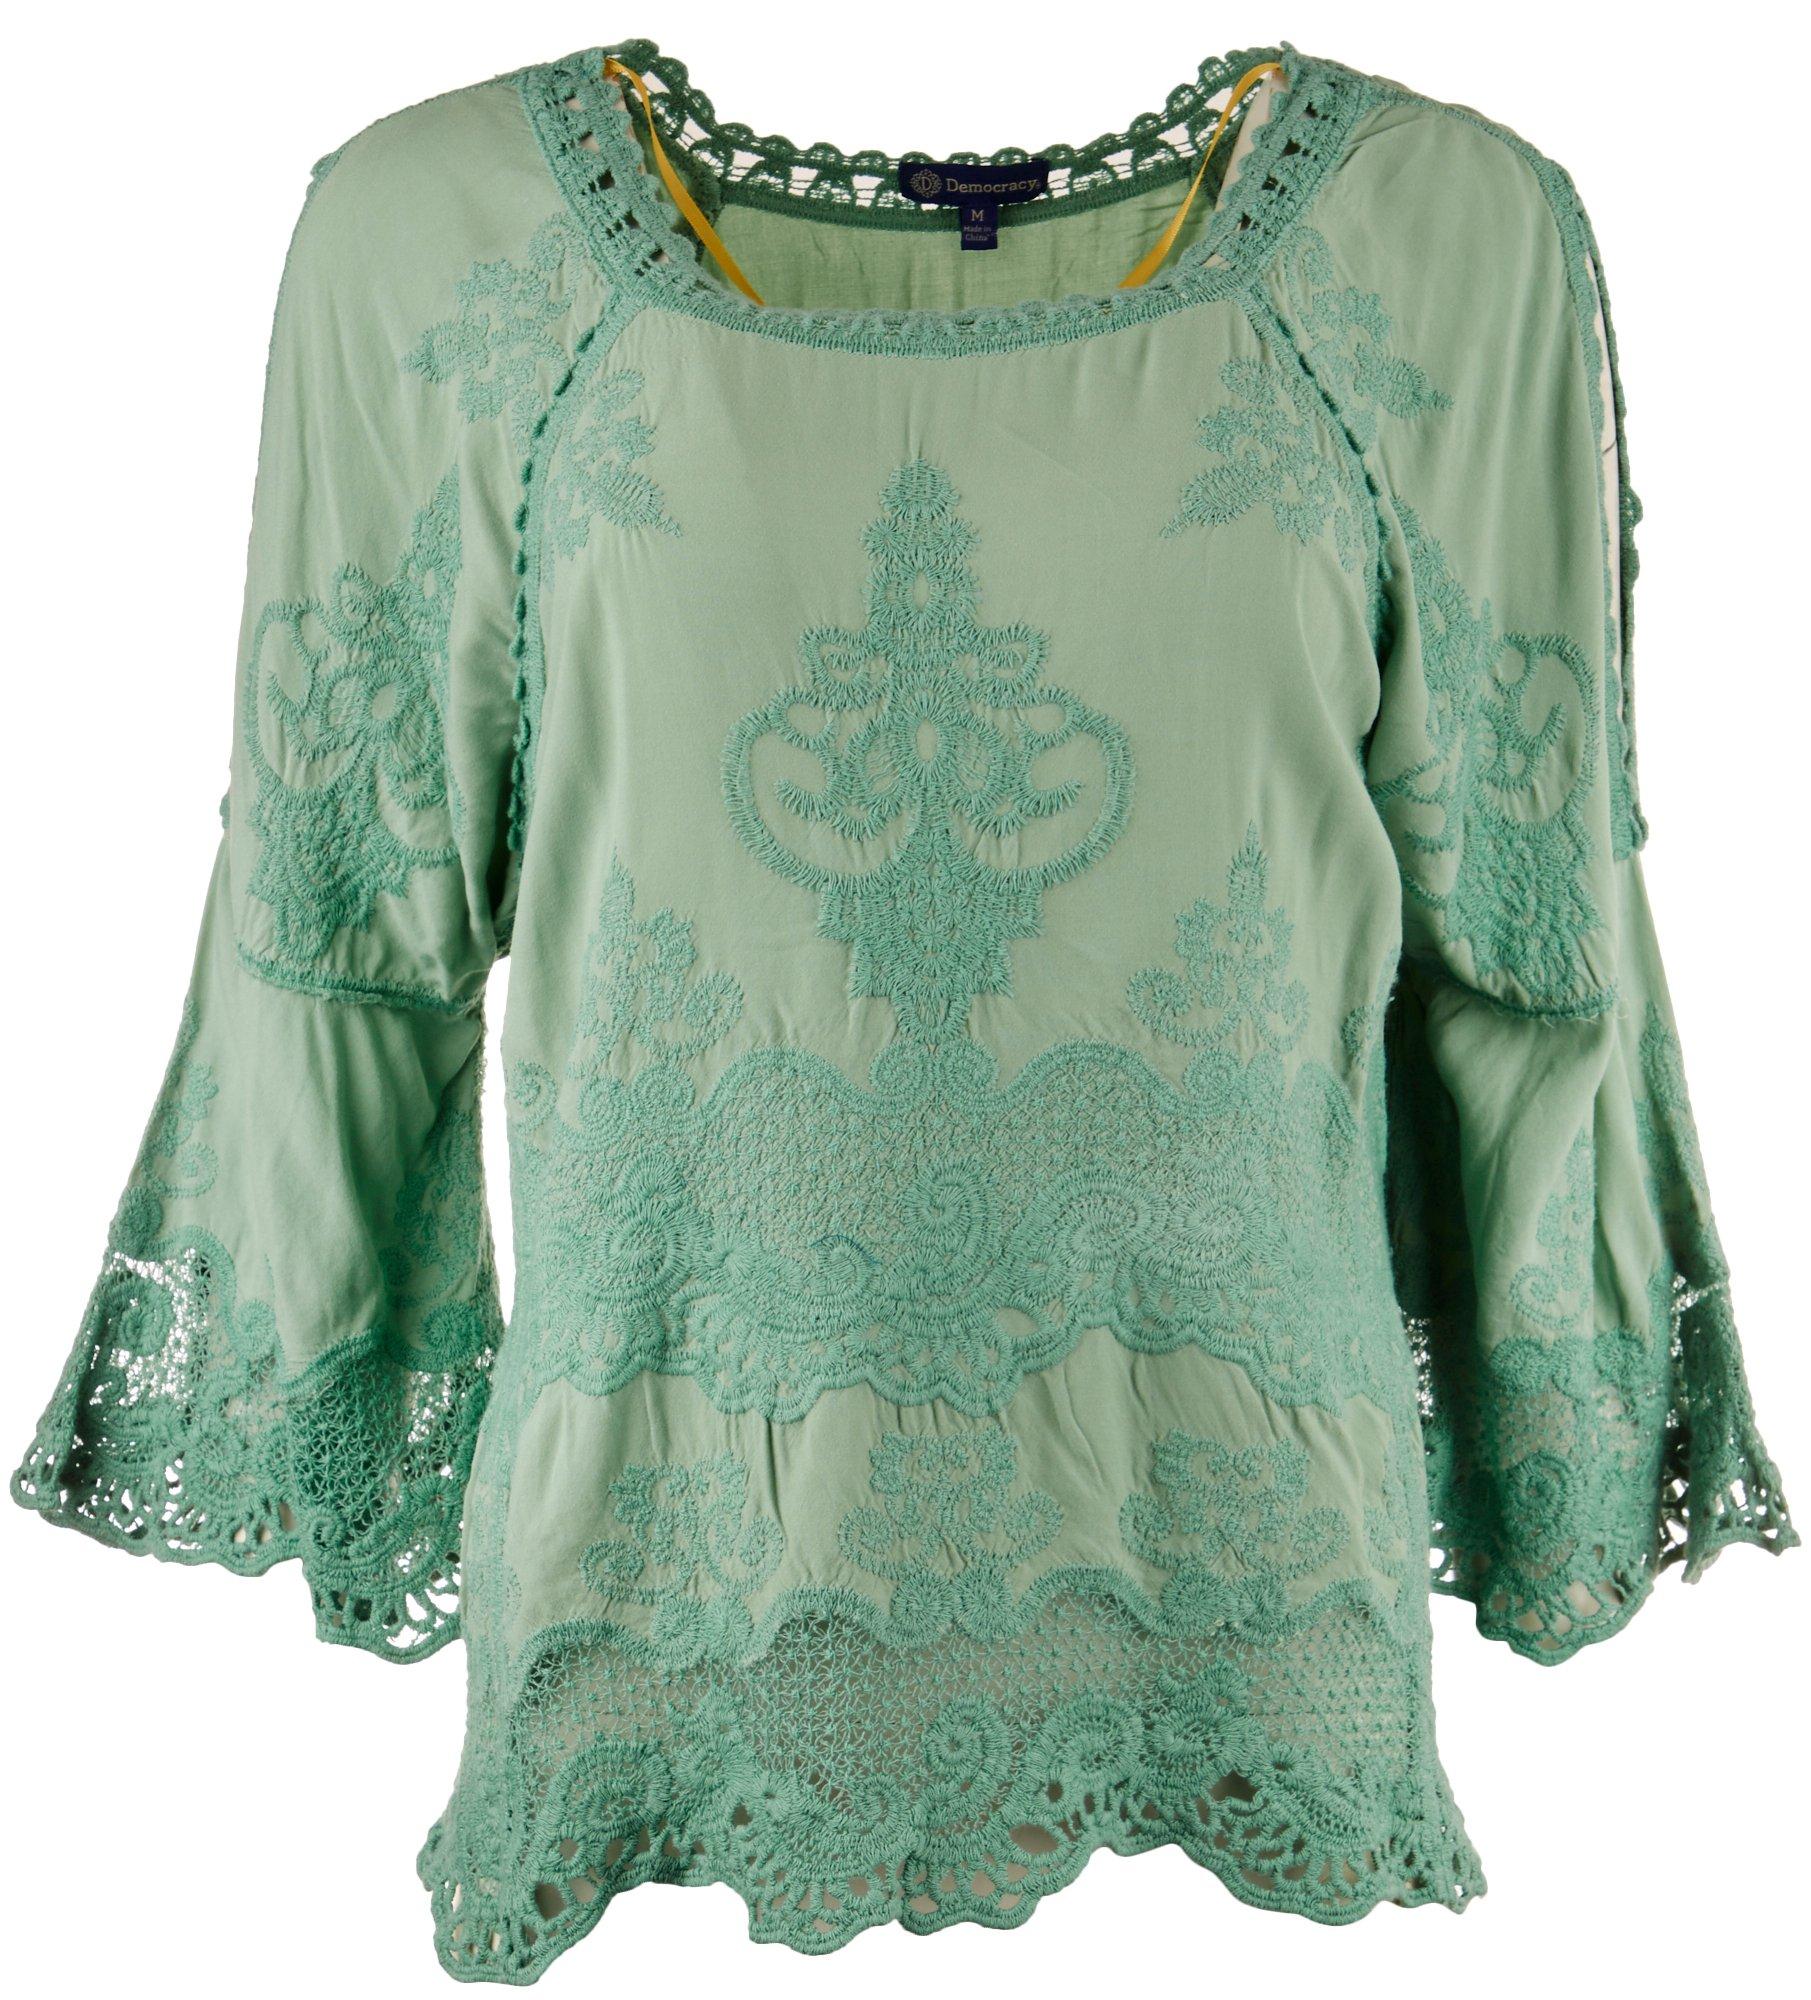 Womens Lace Embellished Top